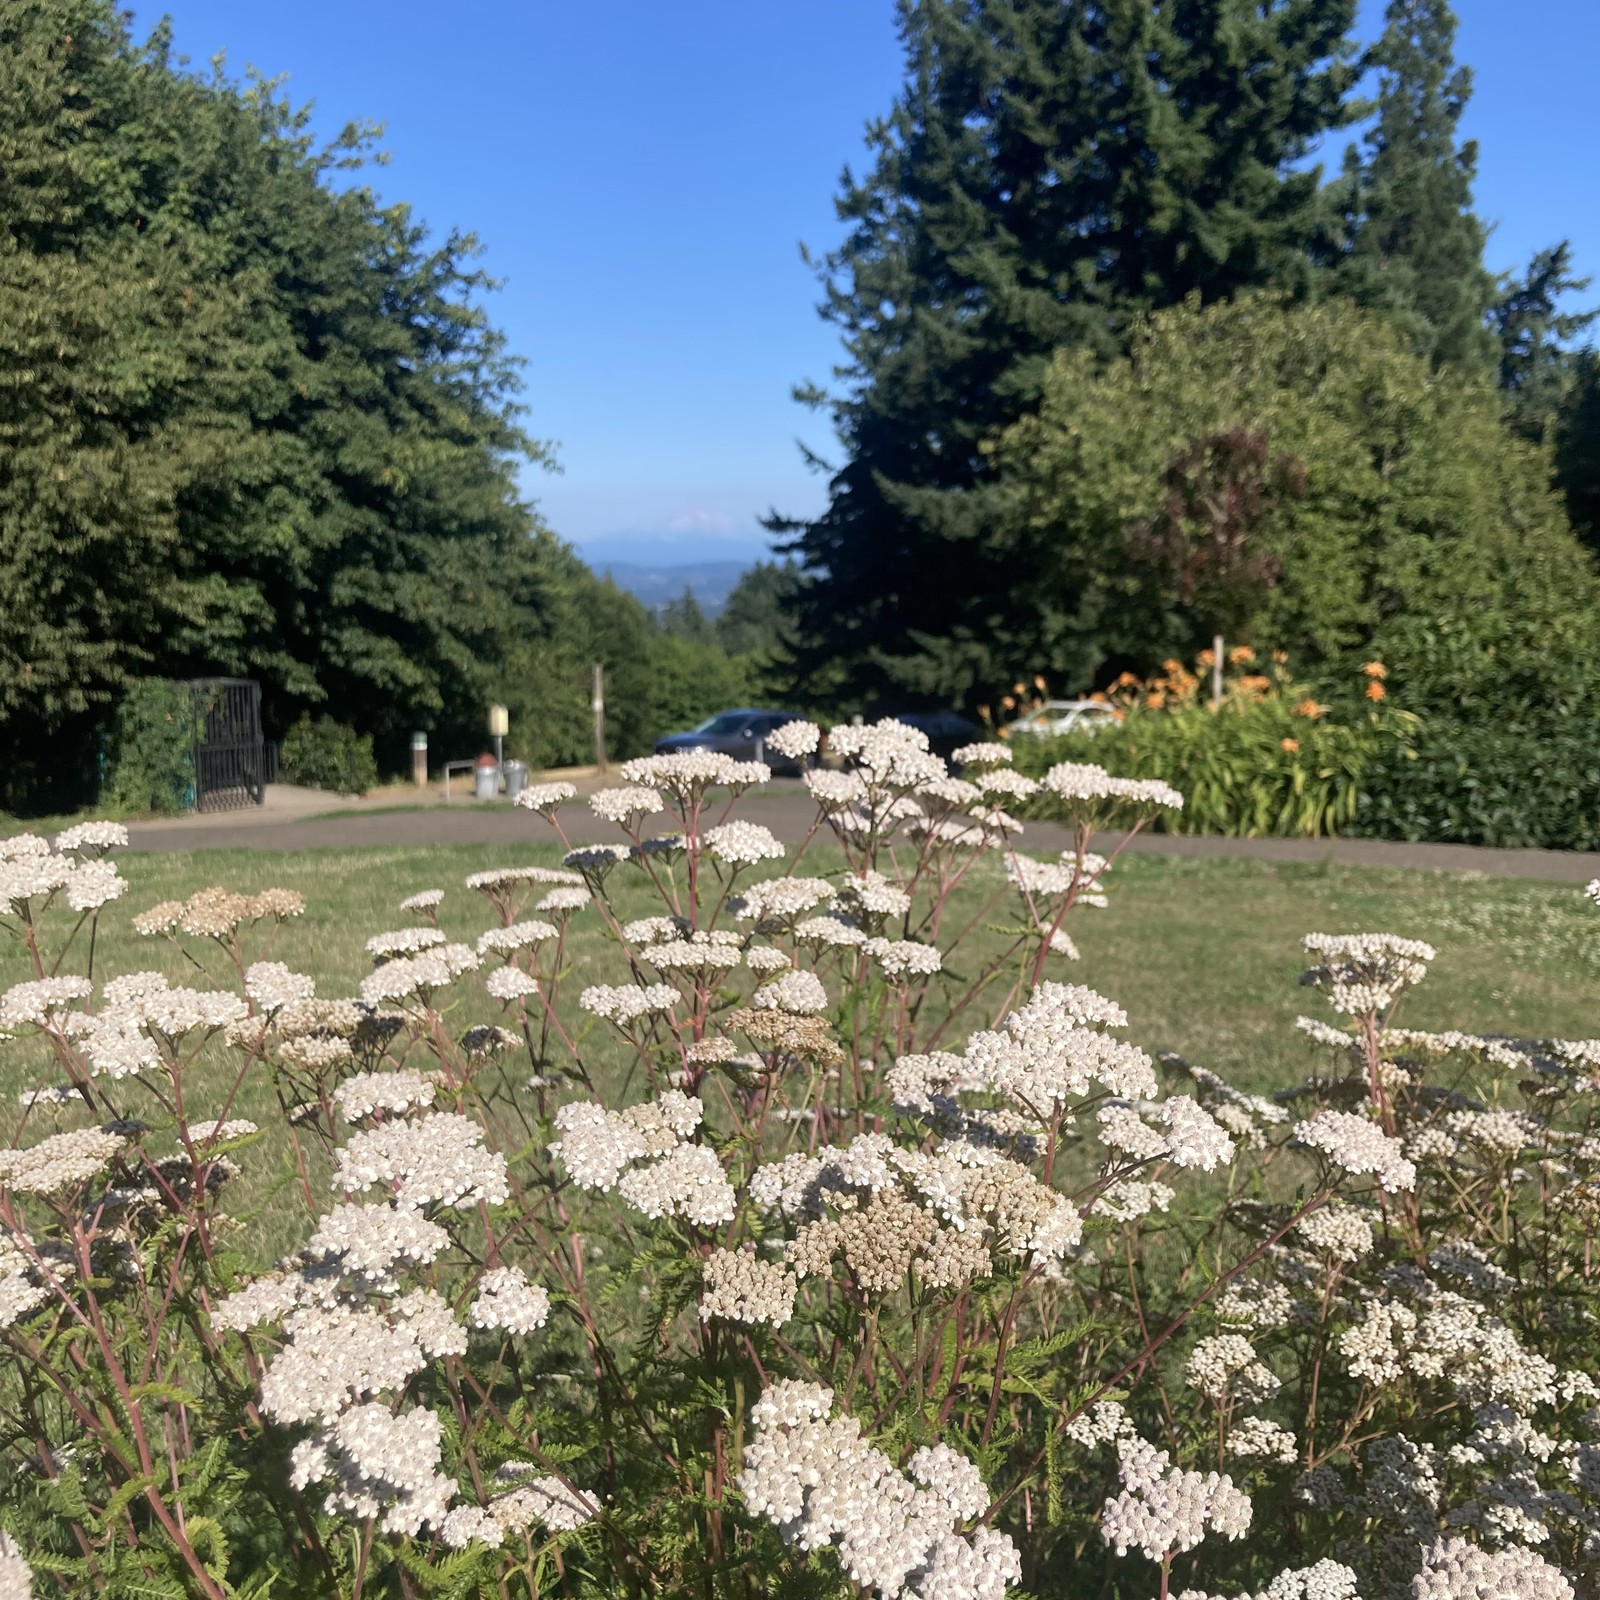 Low perspective shot over a tall stand of Queen Anne’s Lace, with mt hood out of focus on the horizon.